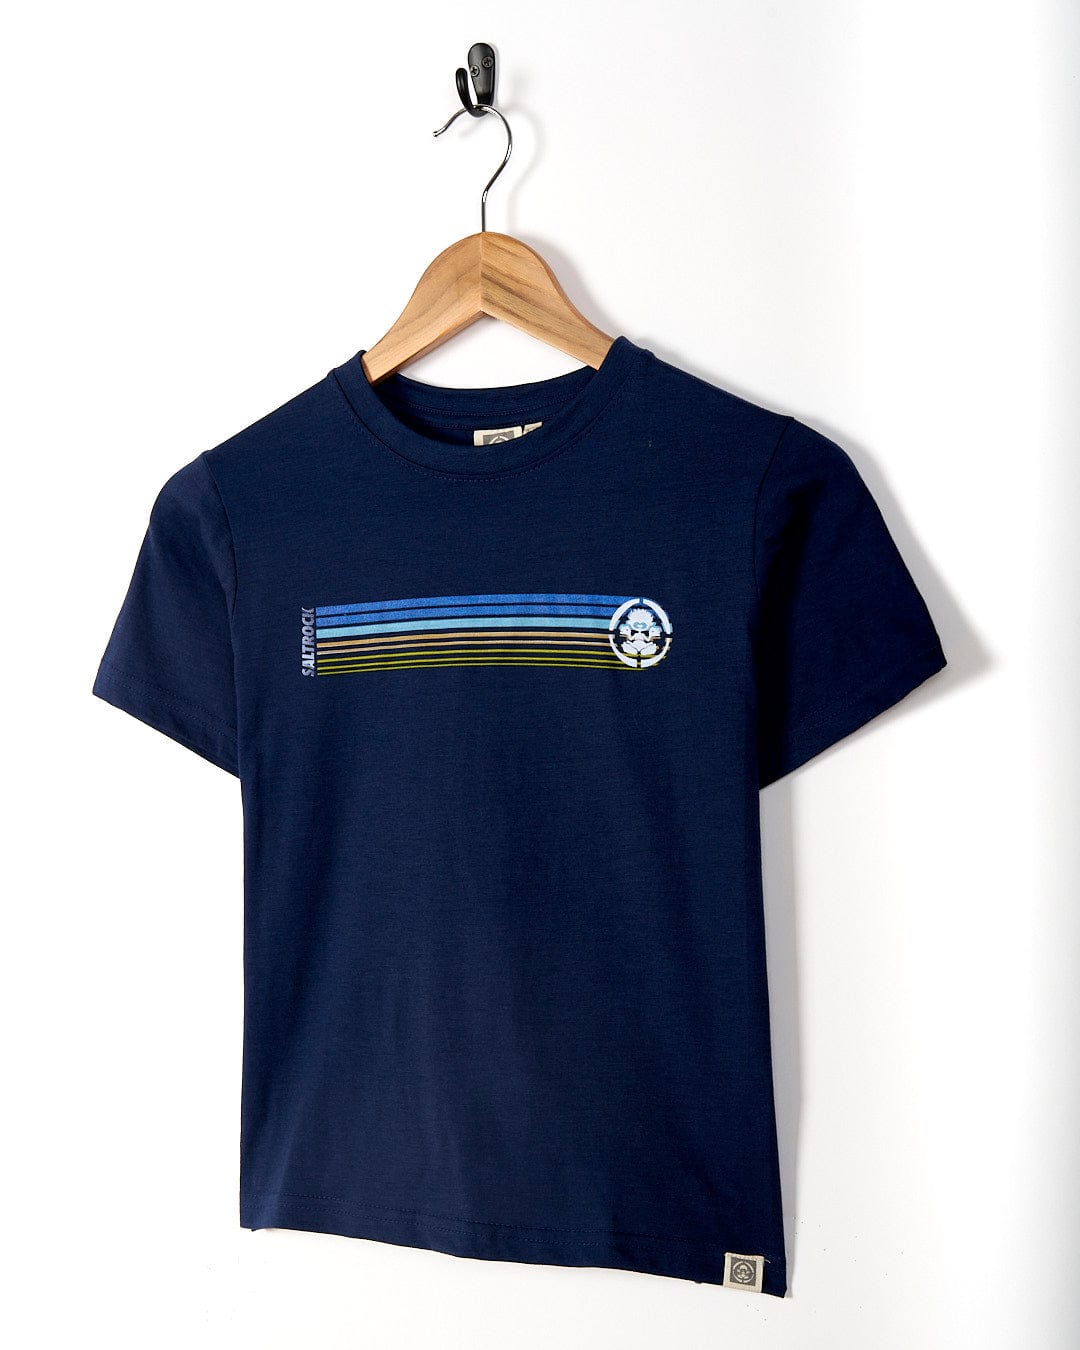 A Tok Stripe - Kids Short Sleeve T-Shirt in Dark Blue with retro stripes and a circular logo on the chest, hanging on a wall-mounted hook by Saltrock.